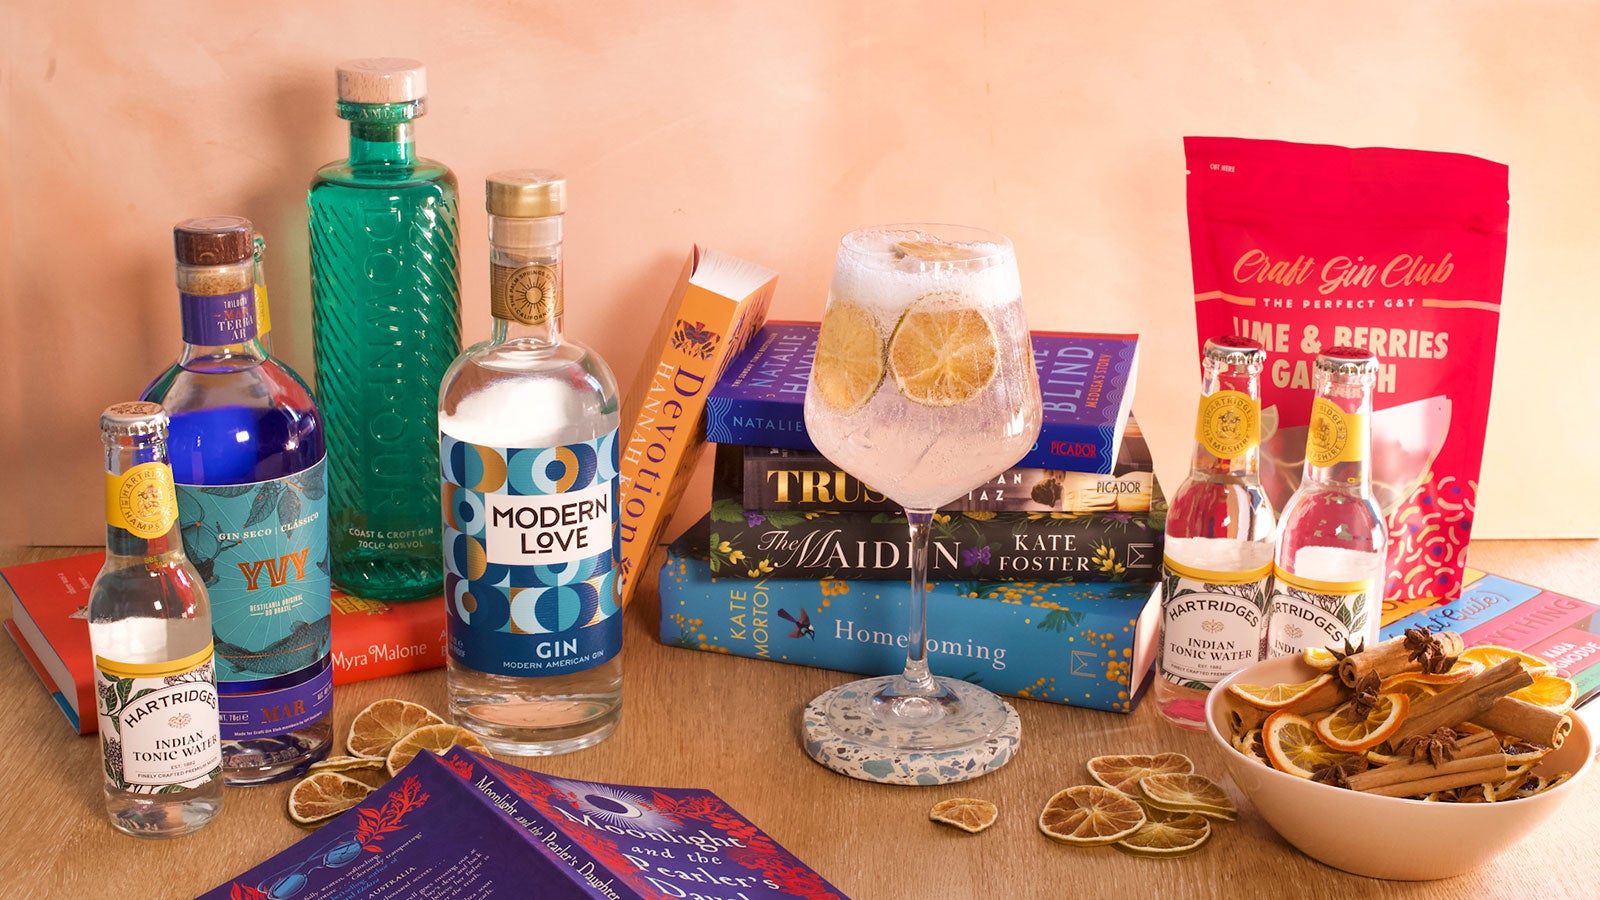 An array of books displayed along with bottles of gin, a gin cocktail, some garnishes and tonics on a wooden table. 